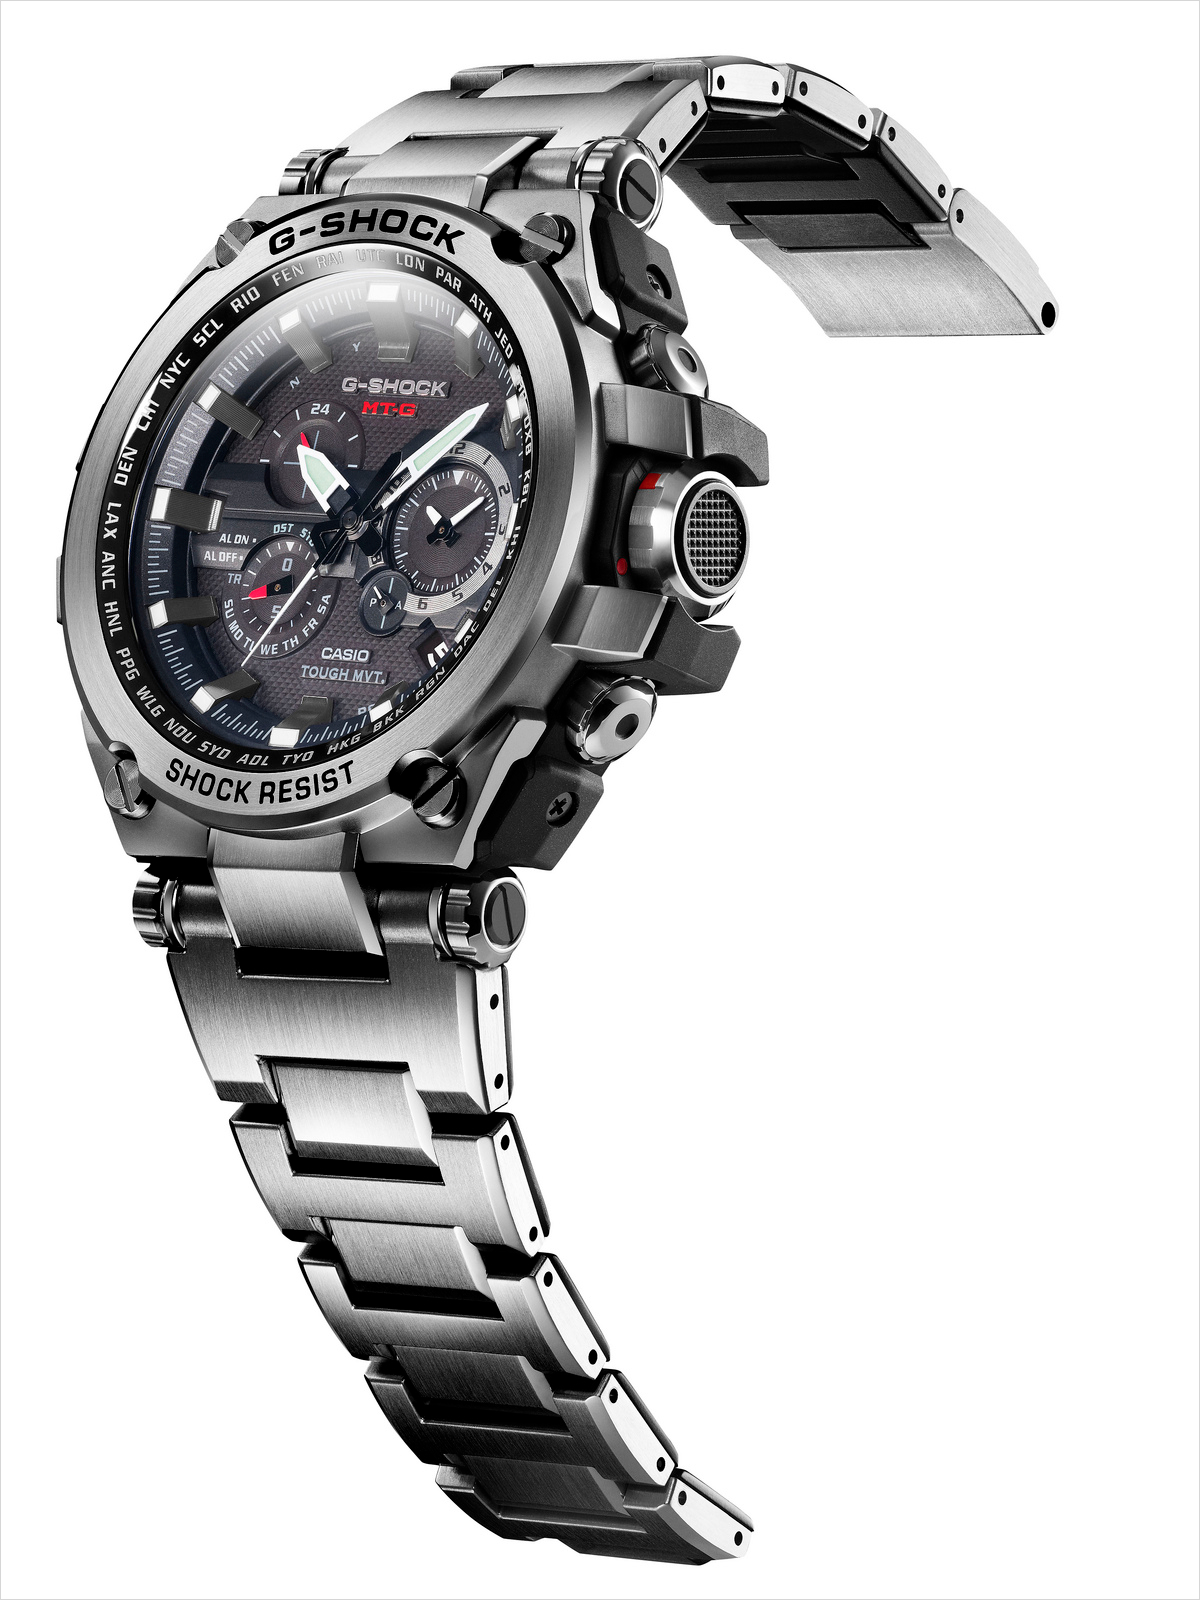 Casio Introduces New Line Of Metal G-Shock Watches, The Metal Twisted MT-G Collection